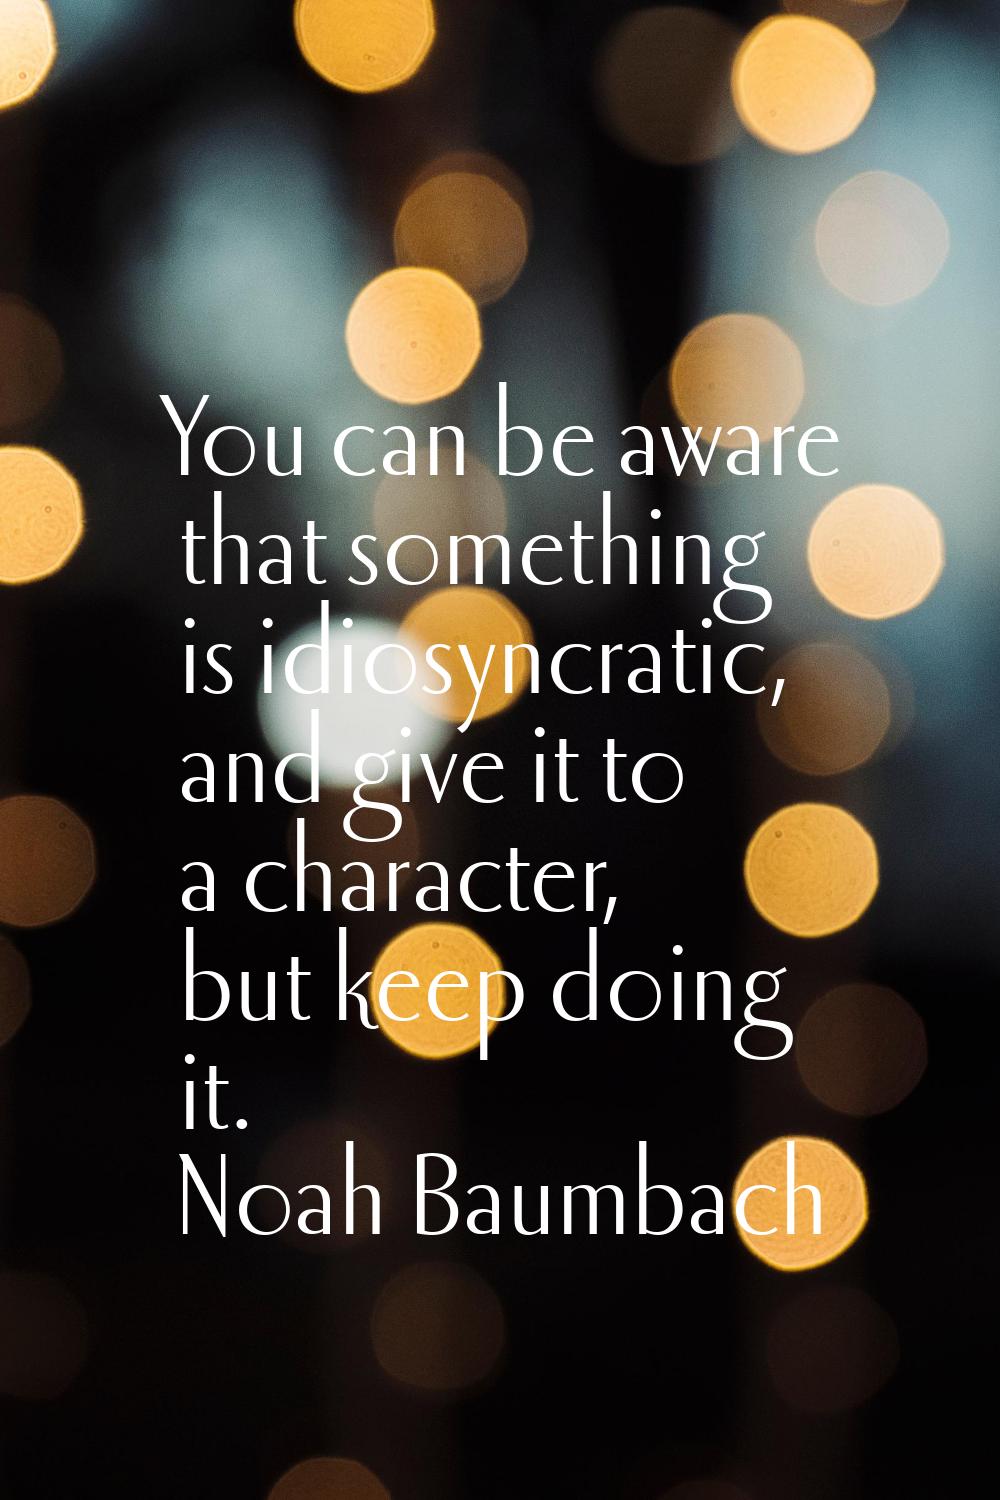 You can be aware that something is idiosyncratic, and give it to a character, but keep doing it.